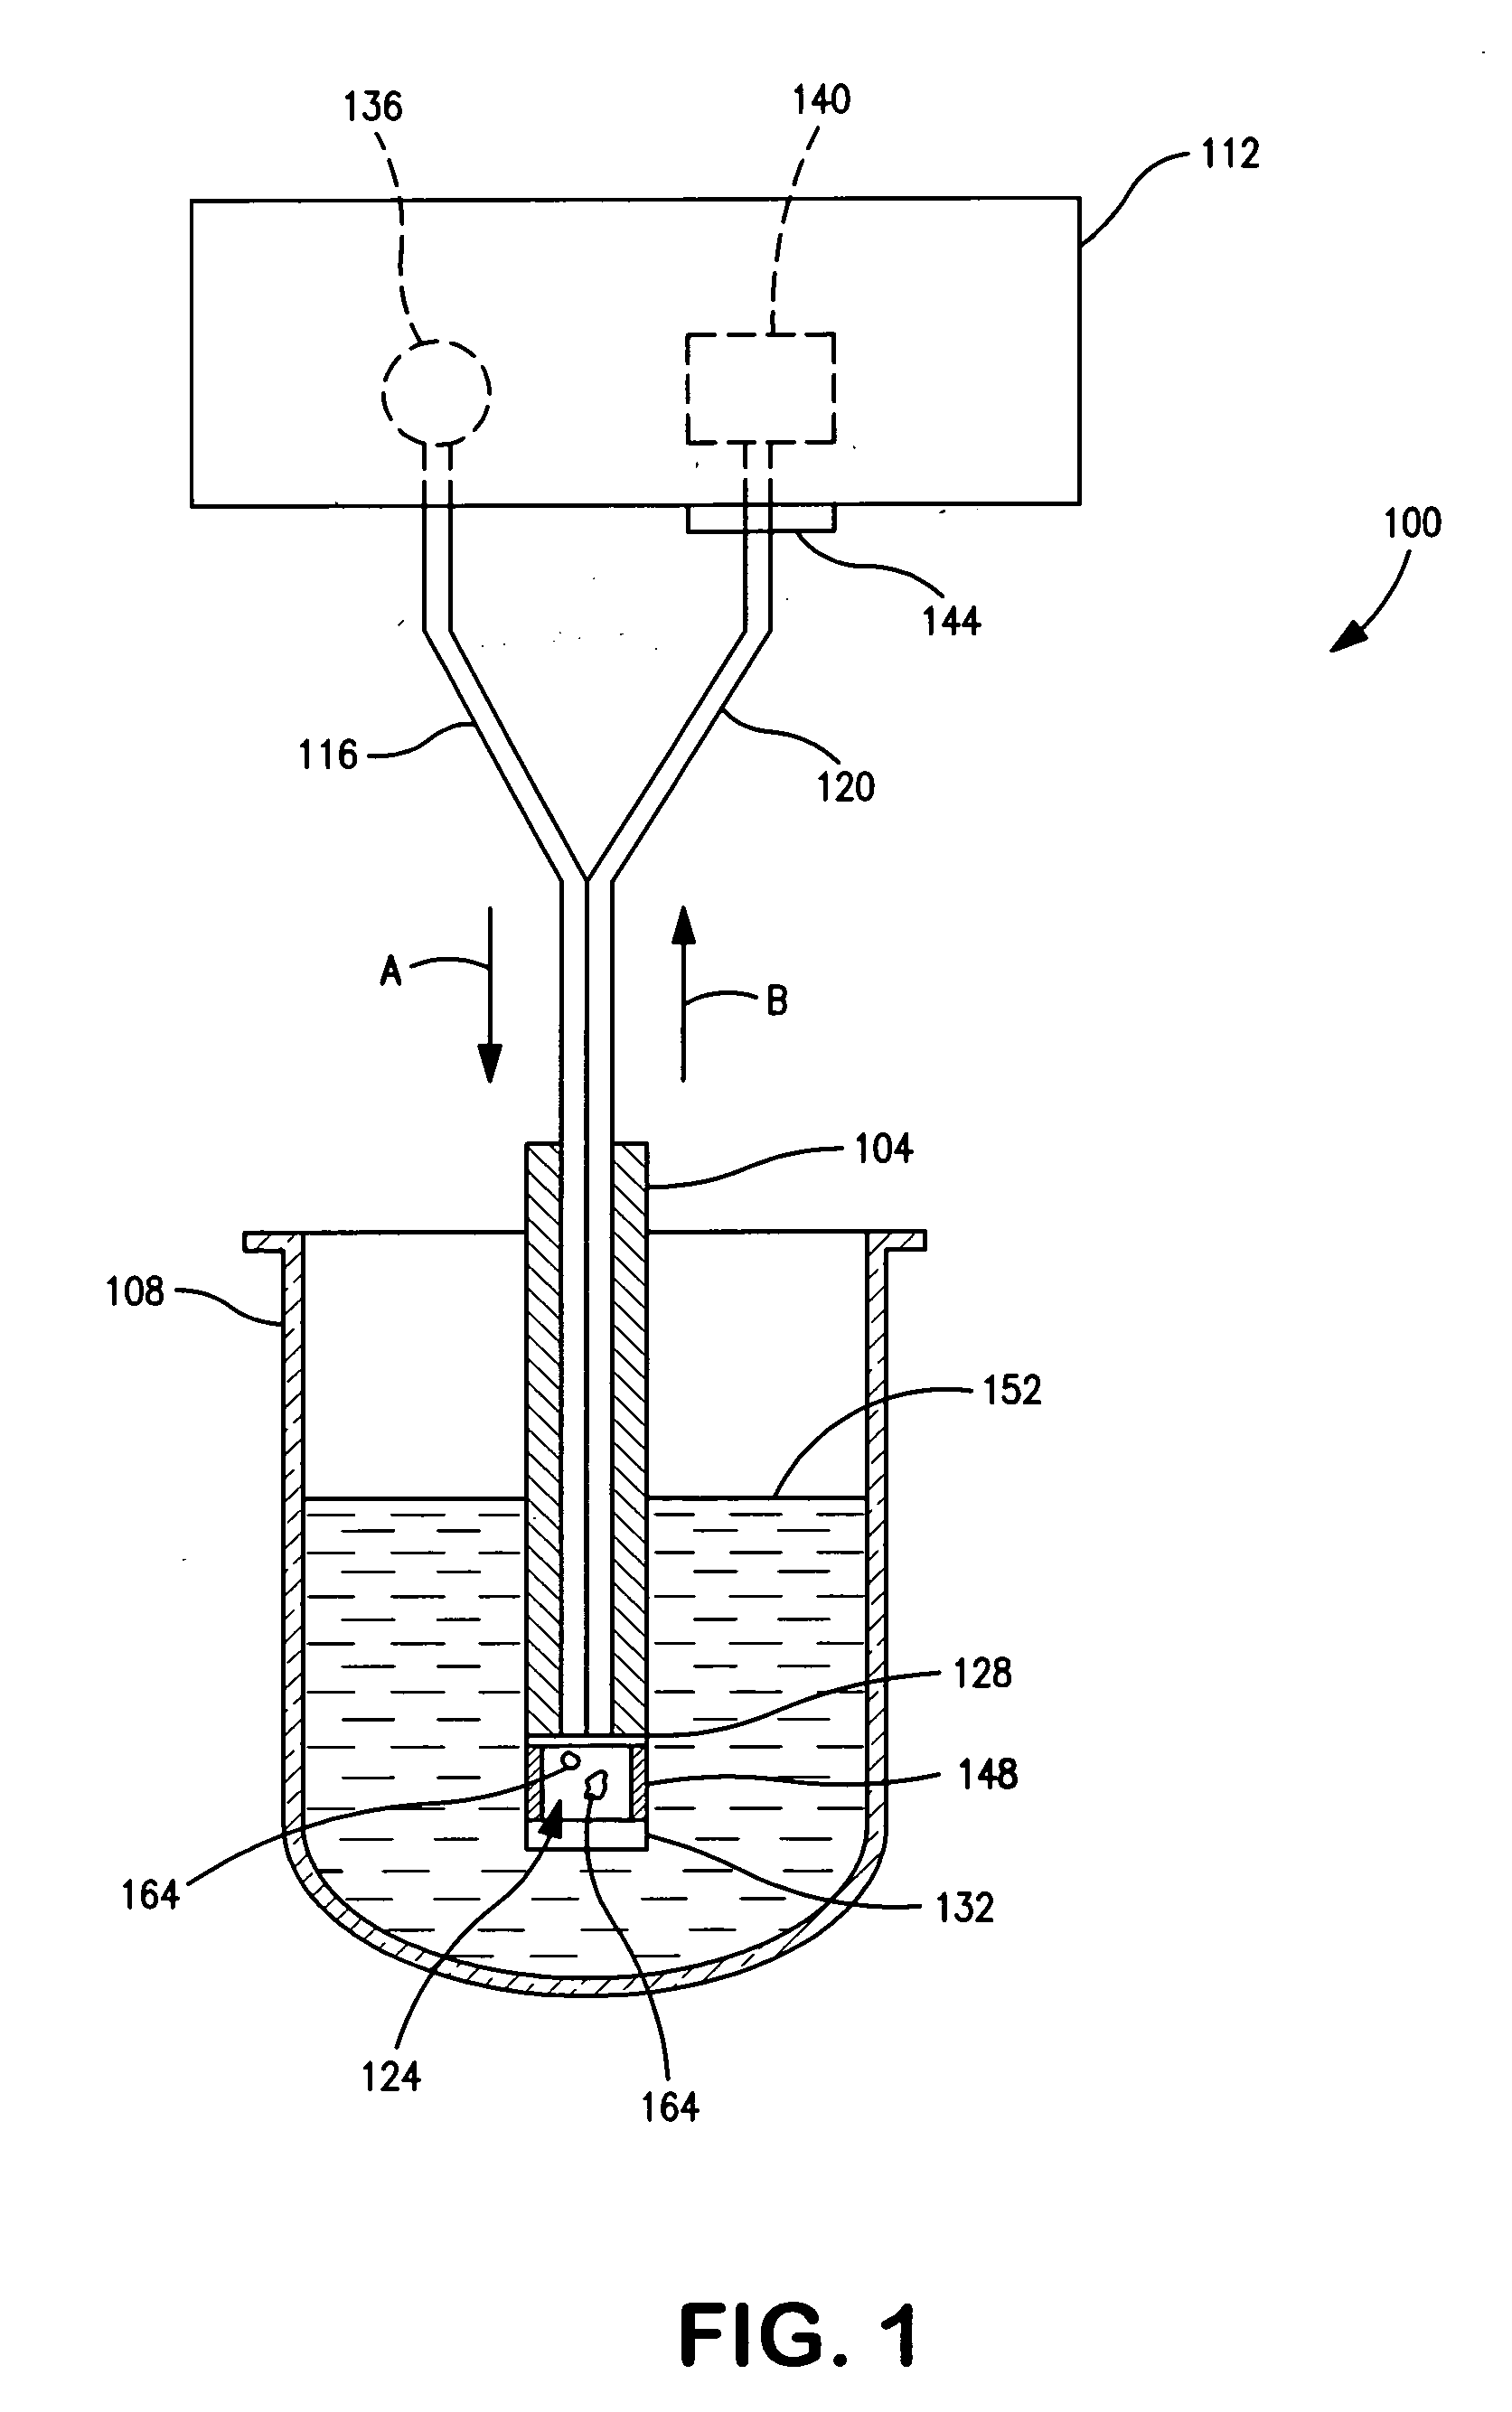 Fiber optic probe and related apparatus, systems and methods for making optics-based measurements of liquid samples